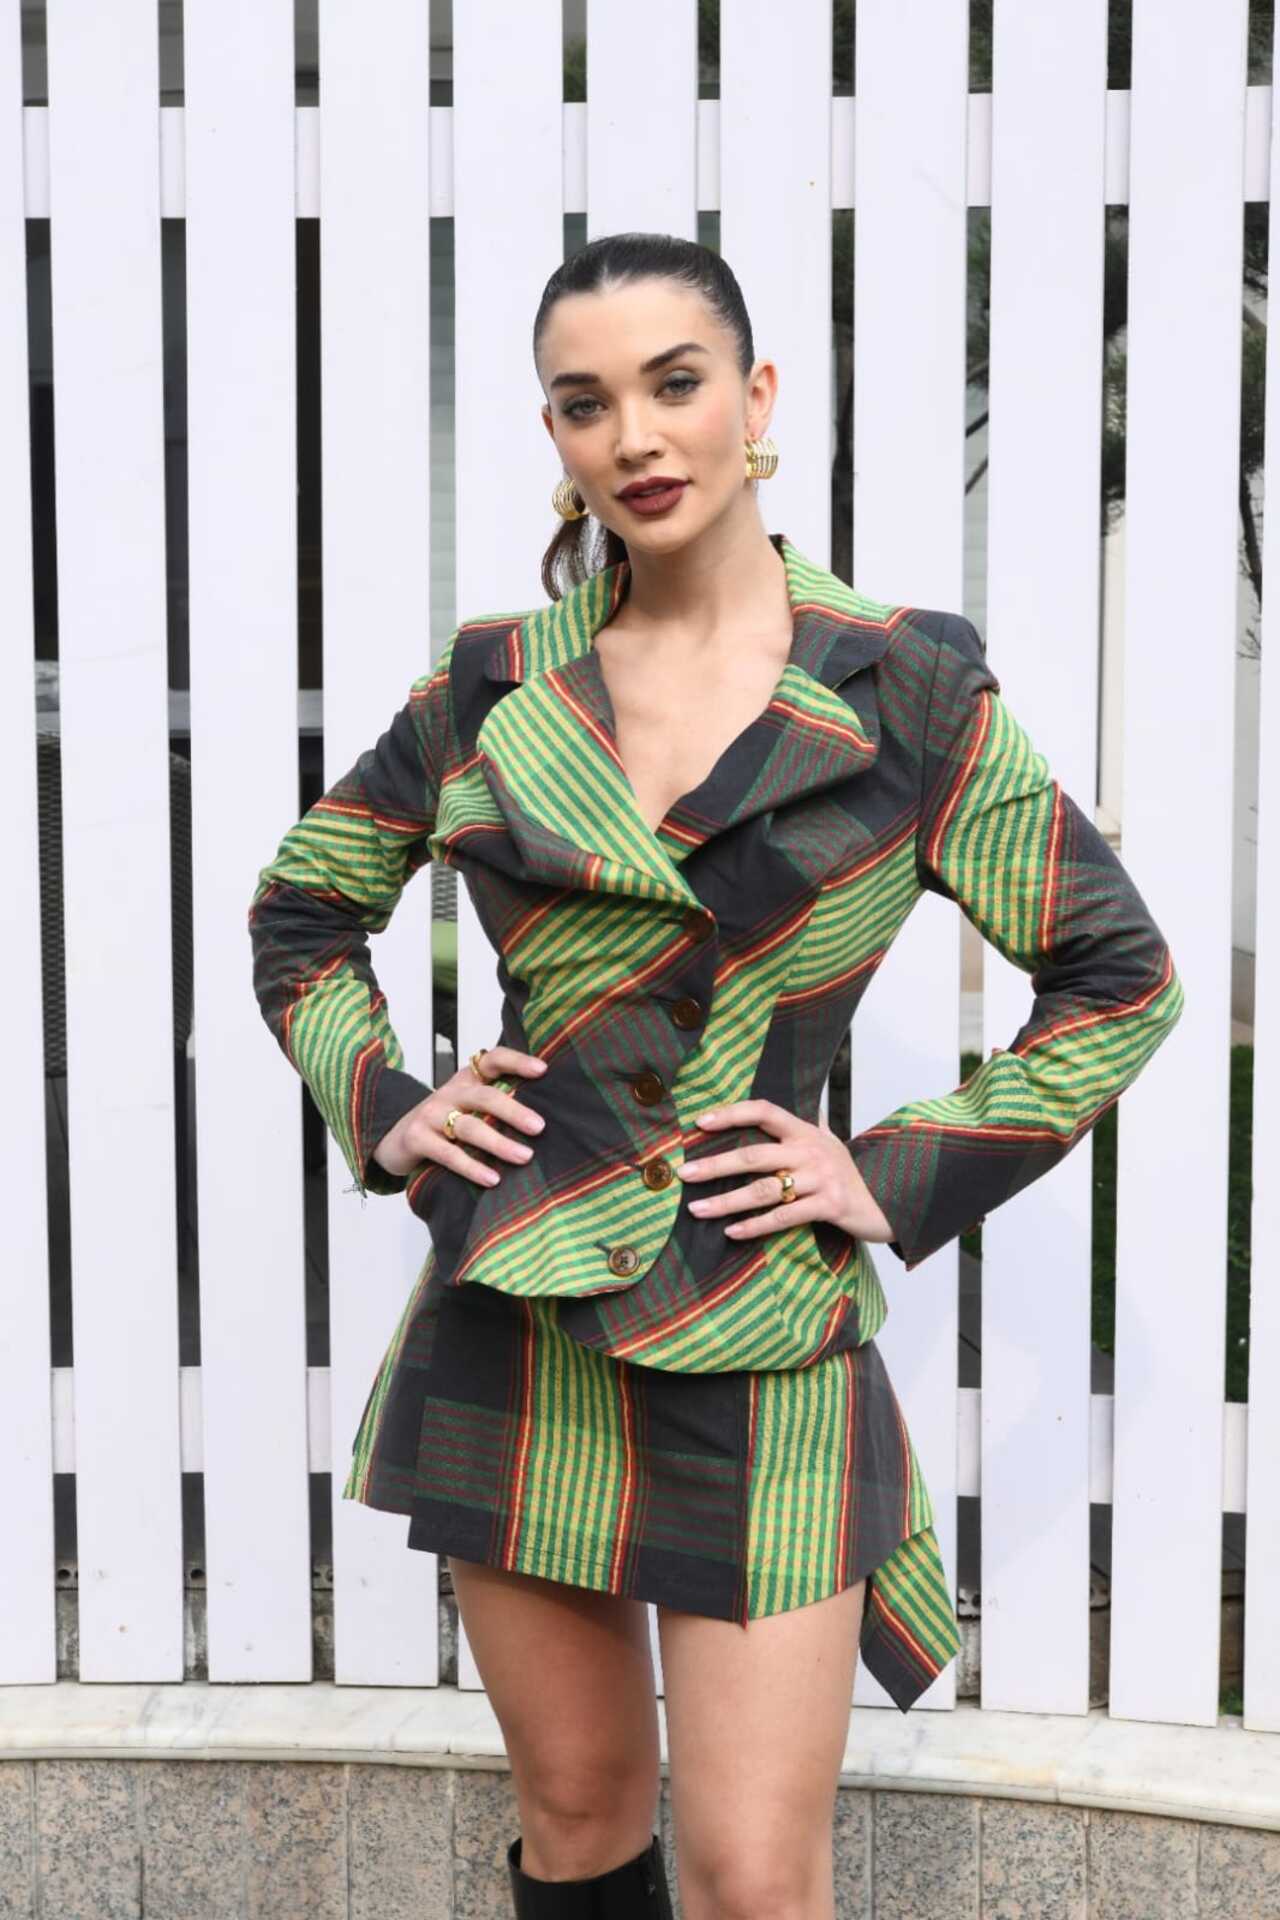 Newly engaged Amy Jackson looked stunning in a green checkered dress while promoting her upcoming film 'Crakk' in Mumbai